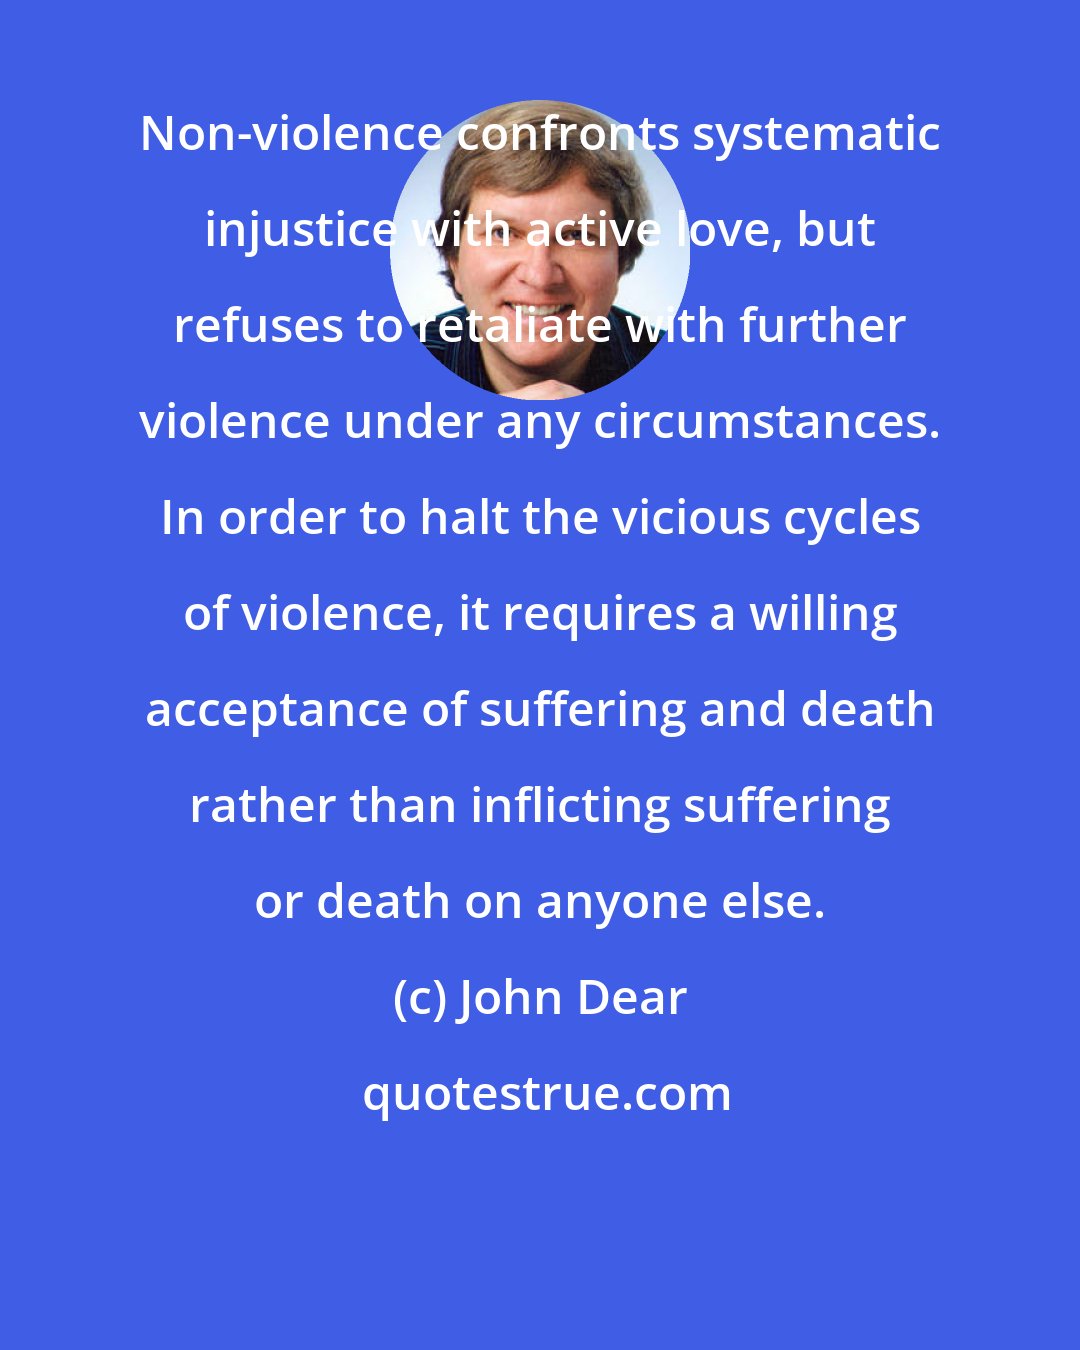 John Dear: Non-violence confronts systematic injustice with active love, but refuses to retaliate with further violence under any circumstances. In order to halt the vicious cycles of violence, it requires a willing acceptance of suffering and death rather than inflicting suffering or death on anyone else.